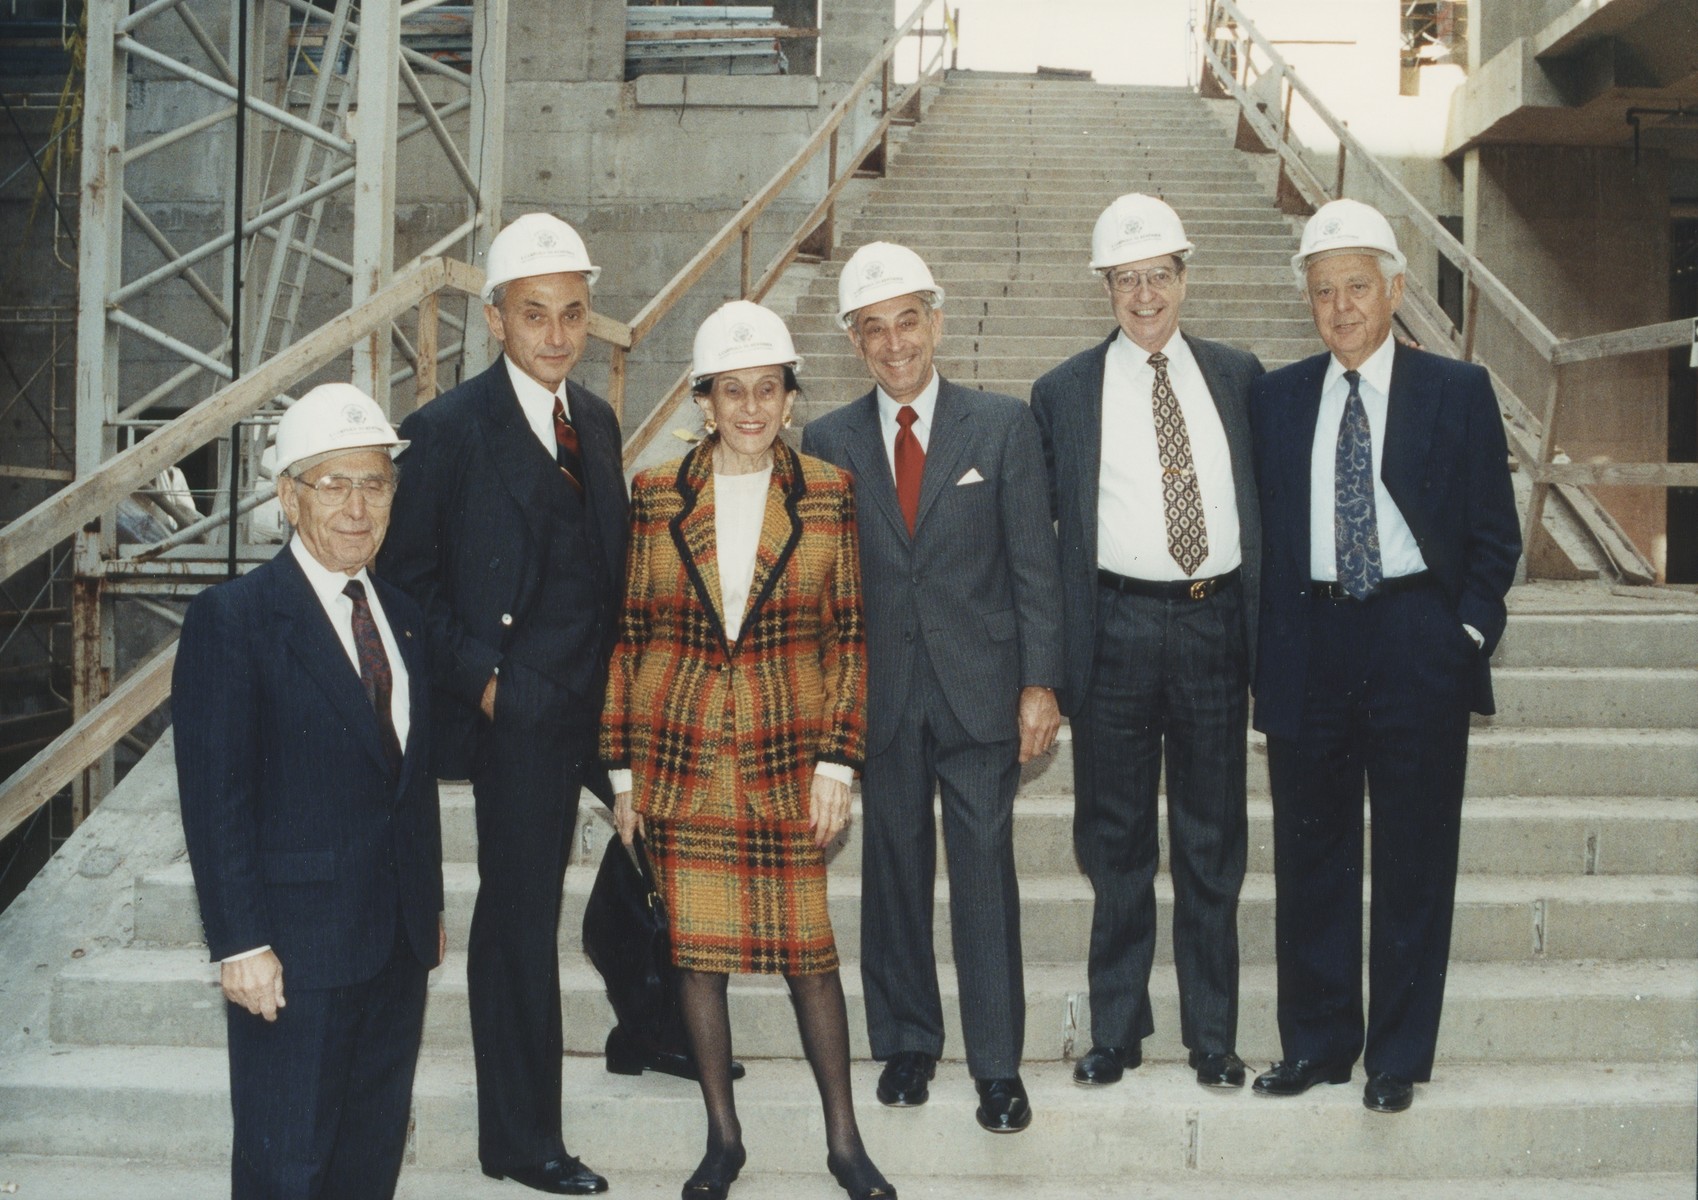 Standing before the grand staircase in the unfinished Hall of Witness are, from left, National Campaign Chairman Miles Lerman; Leslie Wexner; his mother, Bella Wexner; Council Chairman Harvey M. Meyerhoff; Albert Ratner; and Albert (Sonny) Abramson. The Wexner Family donated $5 million to underwrite the Learning Center on September 20, 1991.